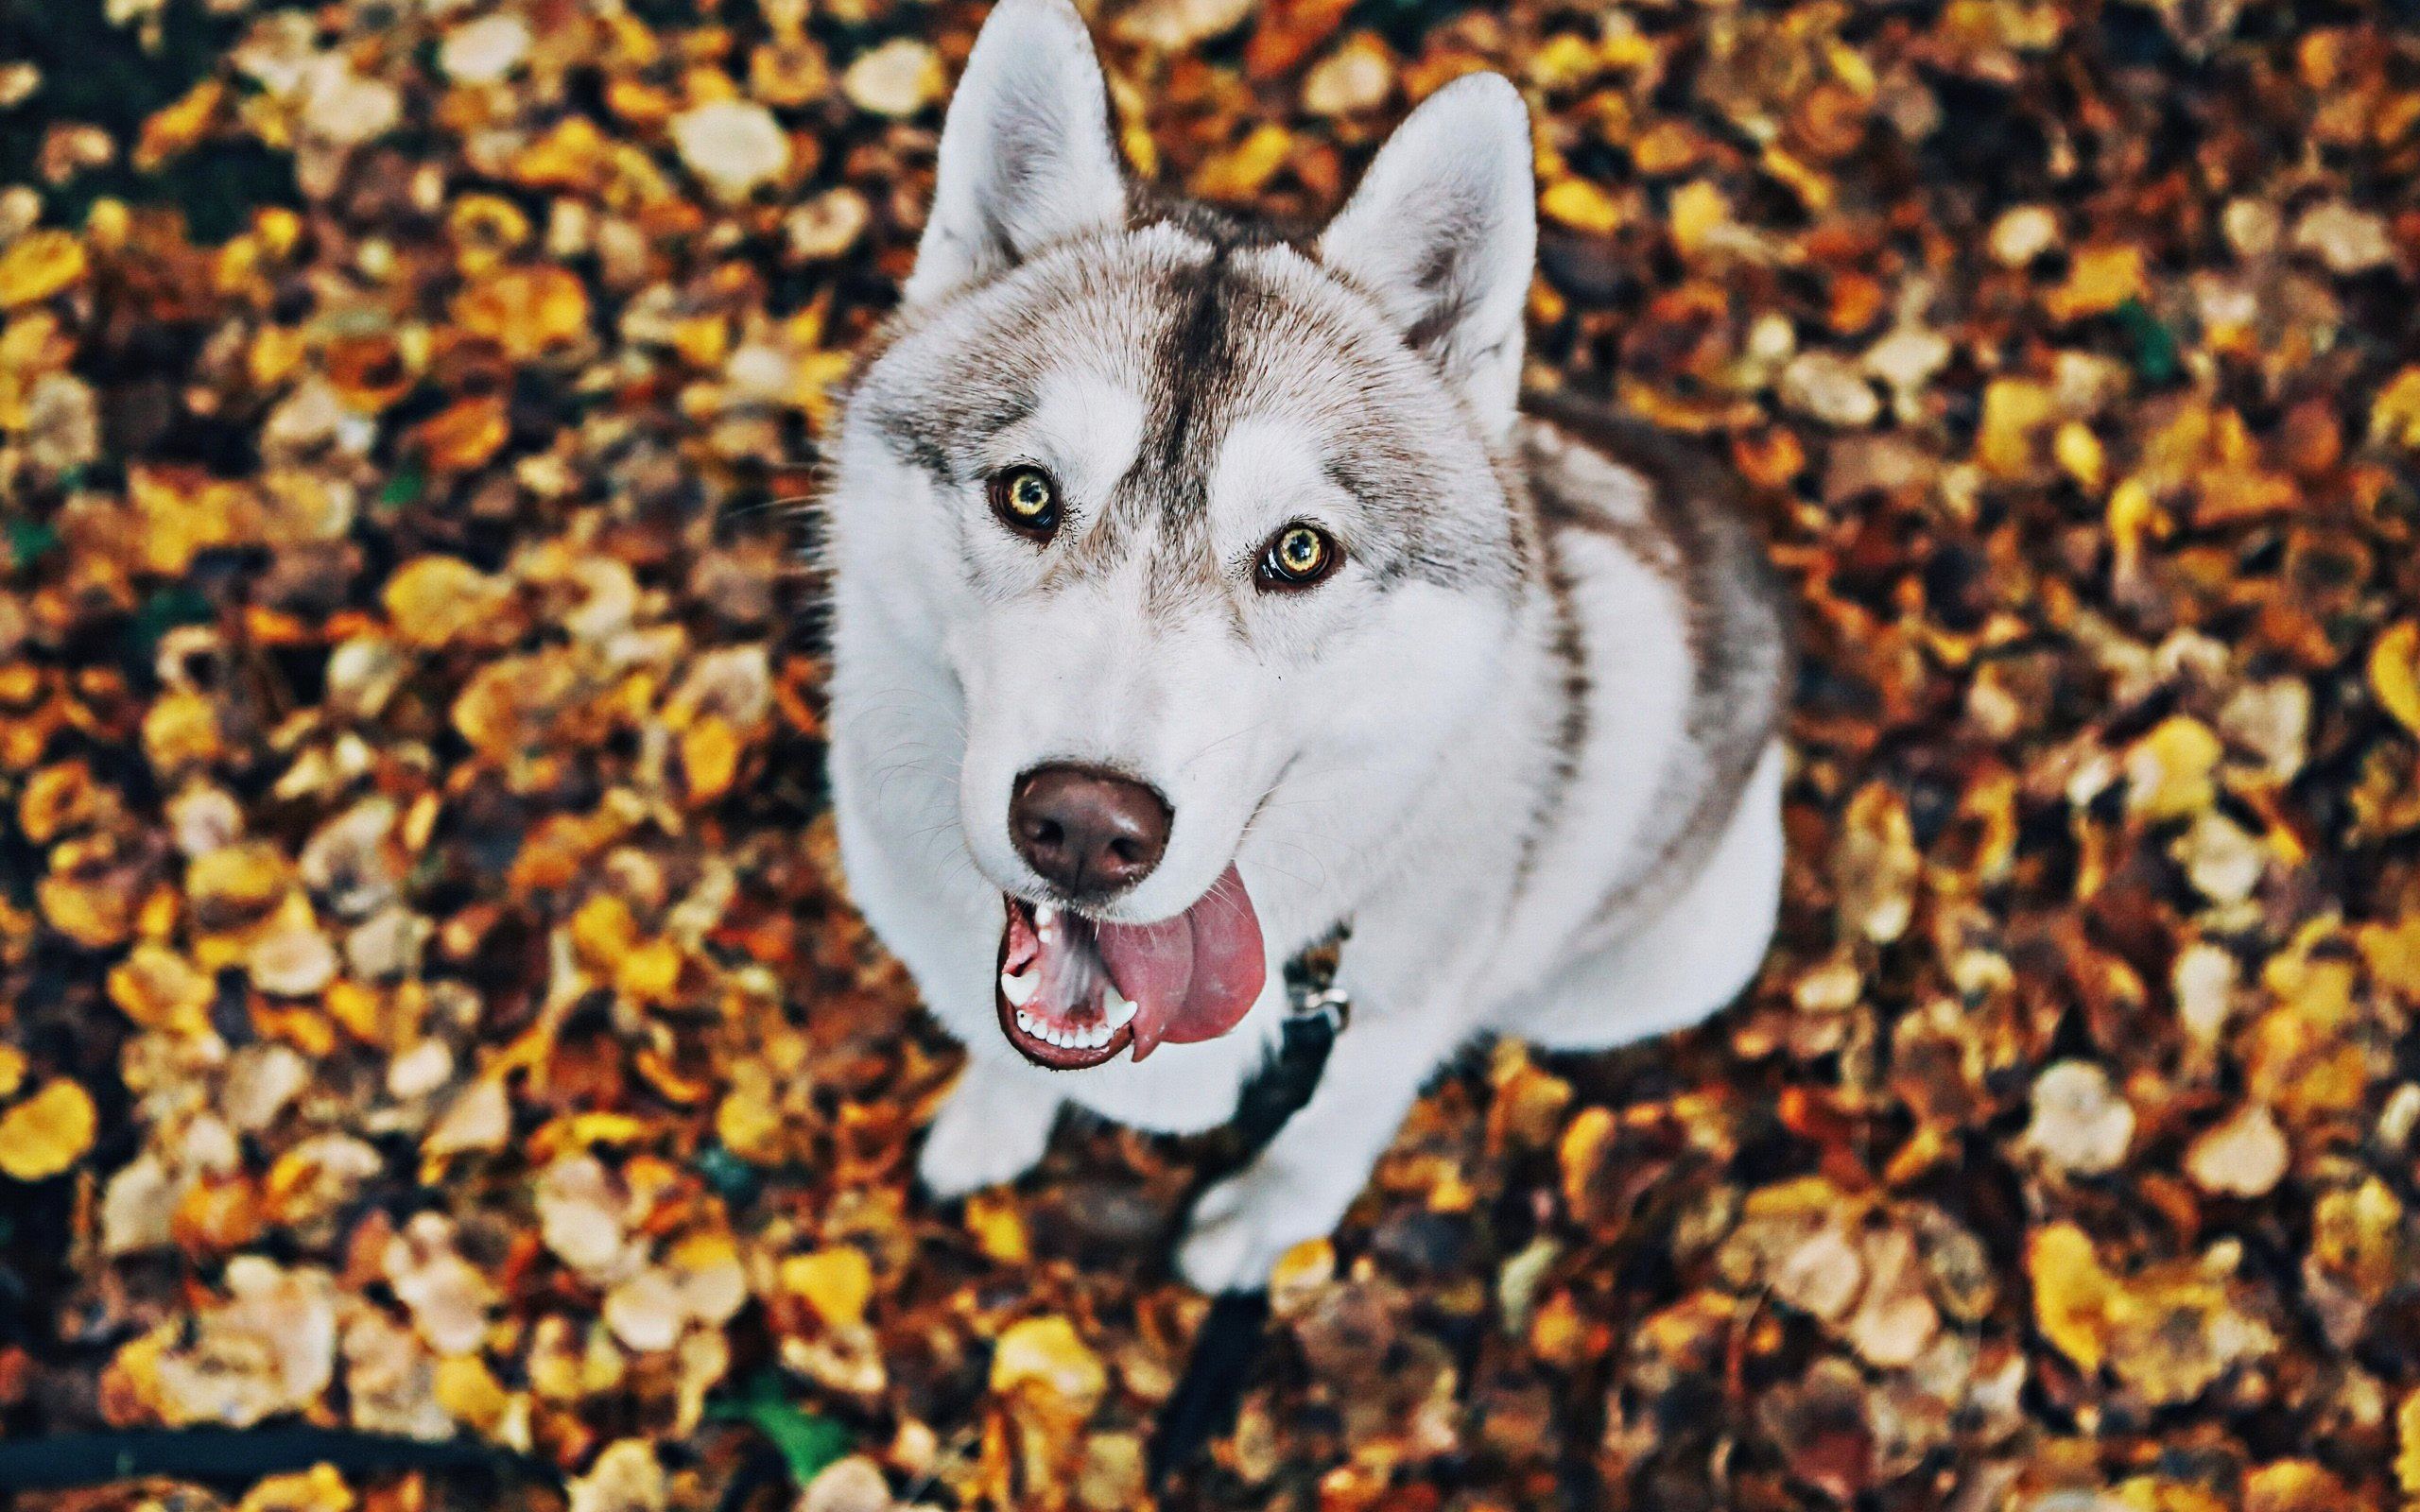 Download Wallpaper Husky Dog, Autumn, Cute Animals, Close Up, Bokeh, Pets, Siberian Husky, Dogs, Husky For Desktop With Resolution 2560x1600. High Quality HD Picture Wallpaper